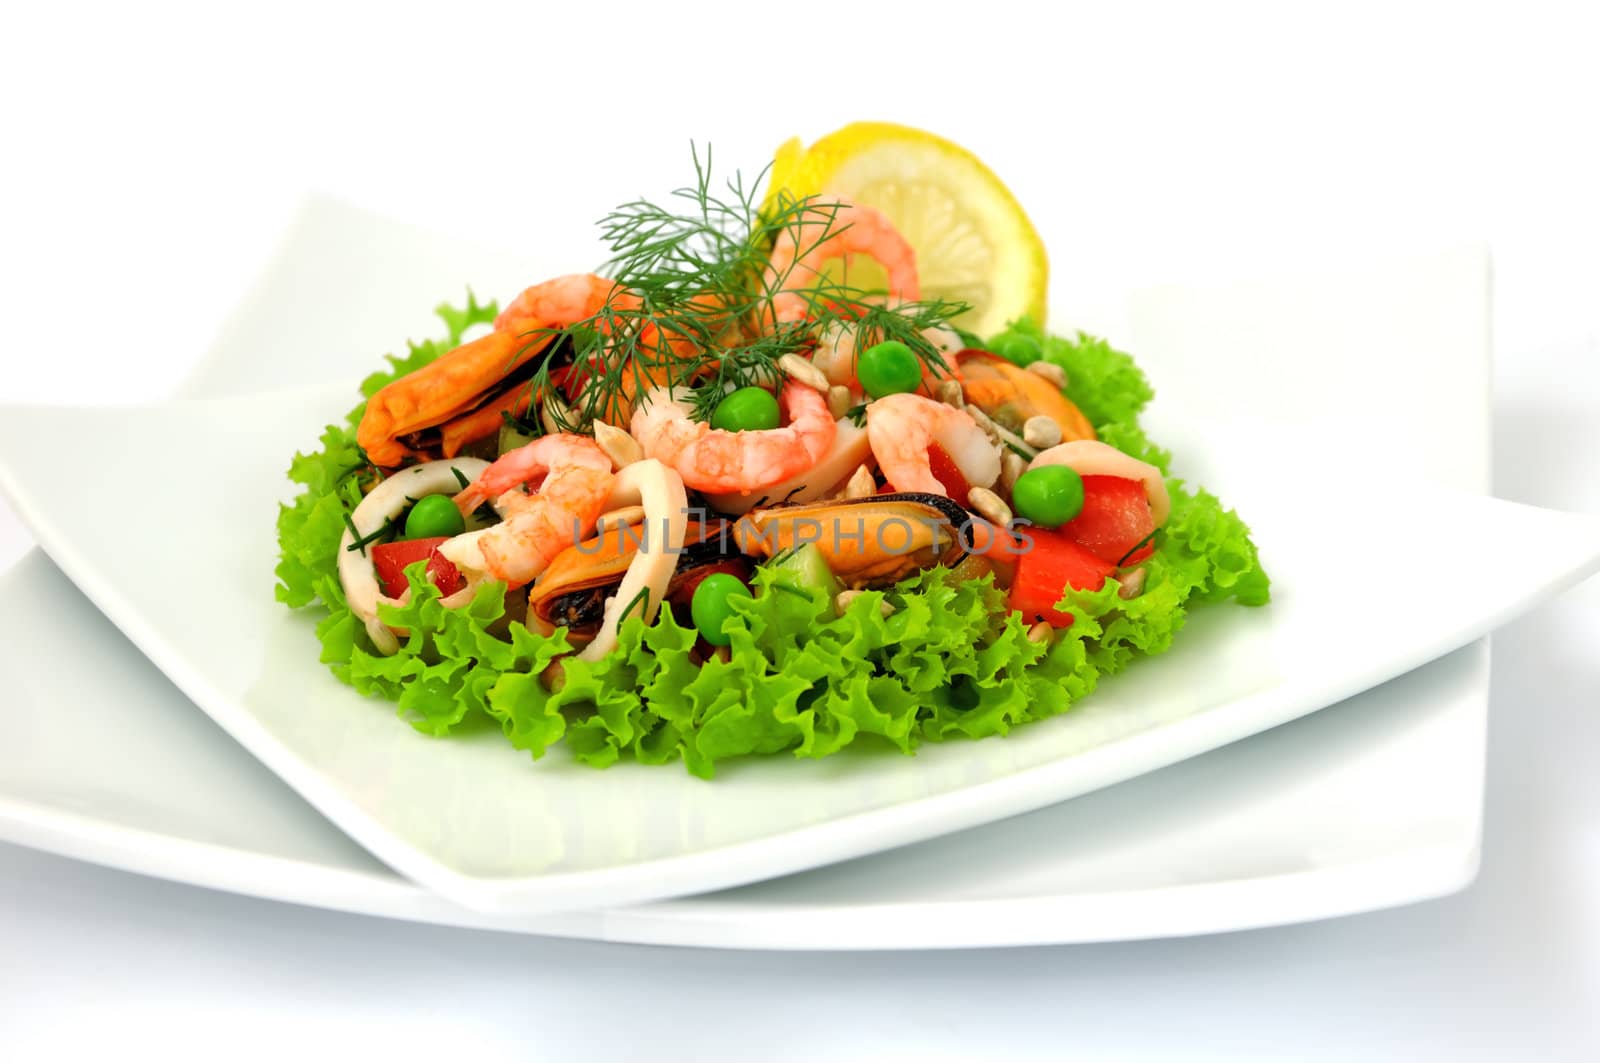 Salad "seafood mix" by Apolonia